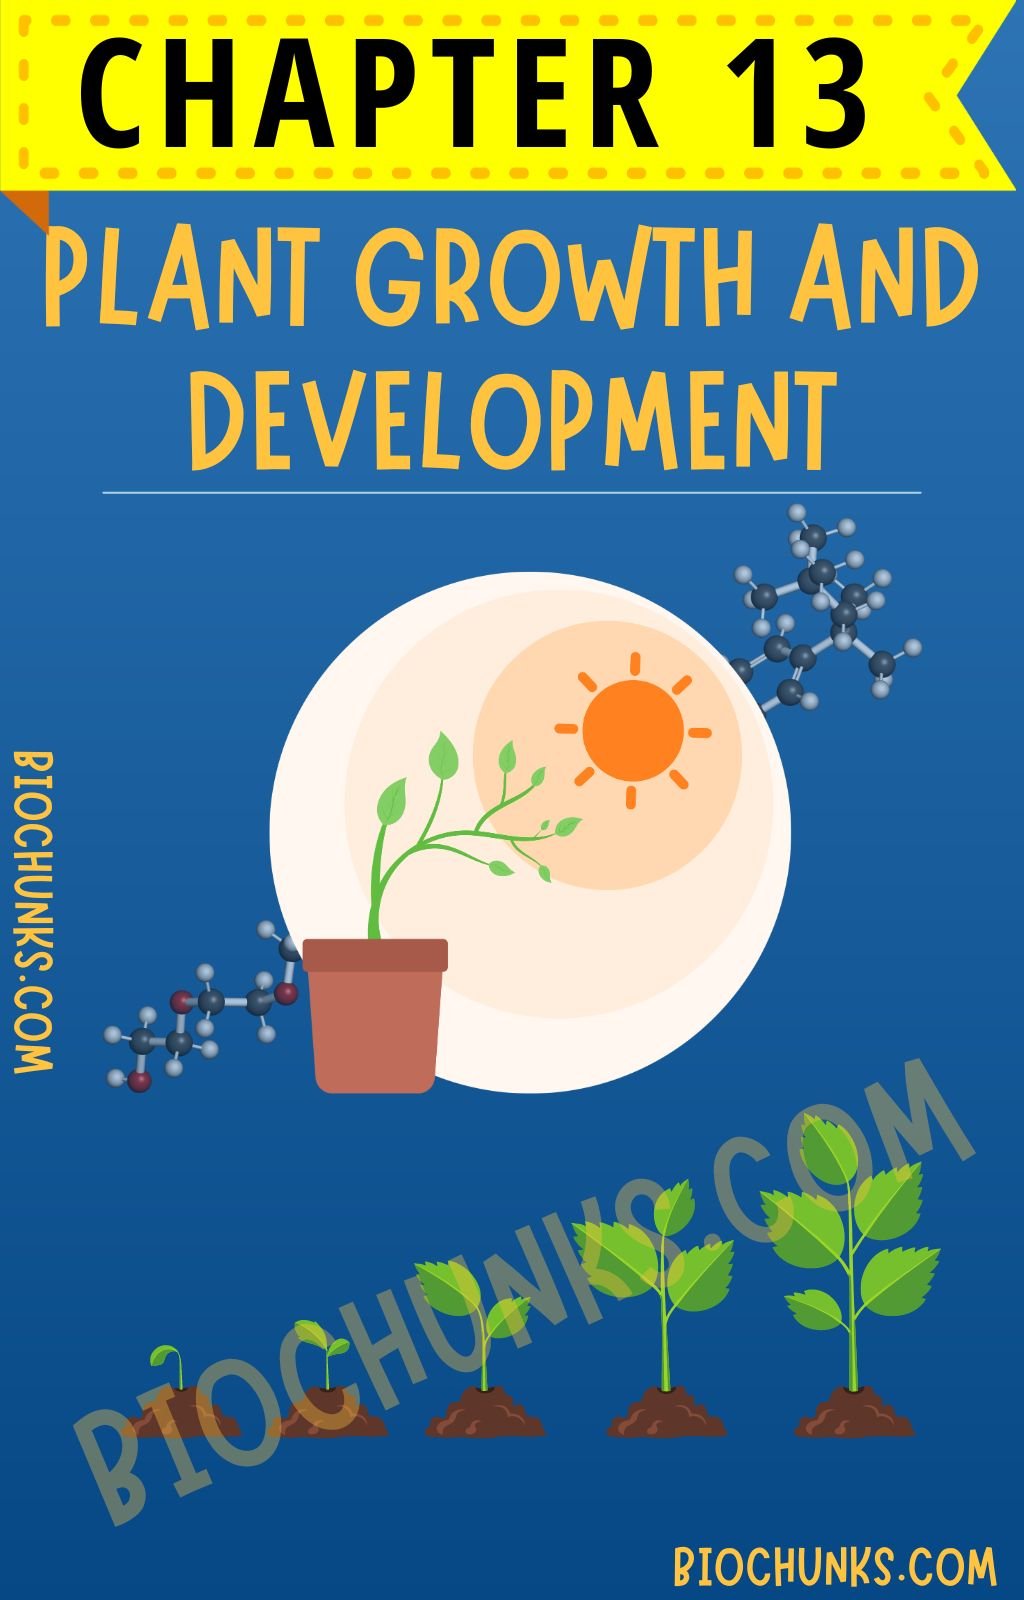 Plant Growth and Development Chapter 13 Class 11th biochunks.com